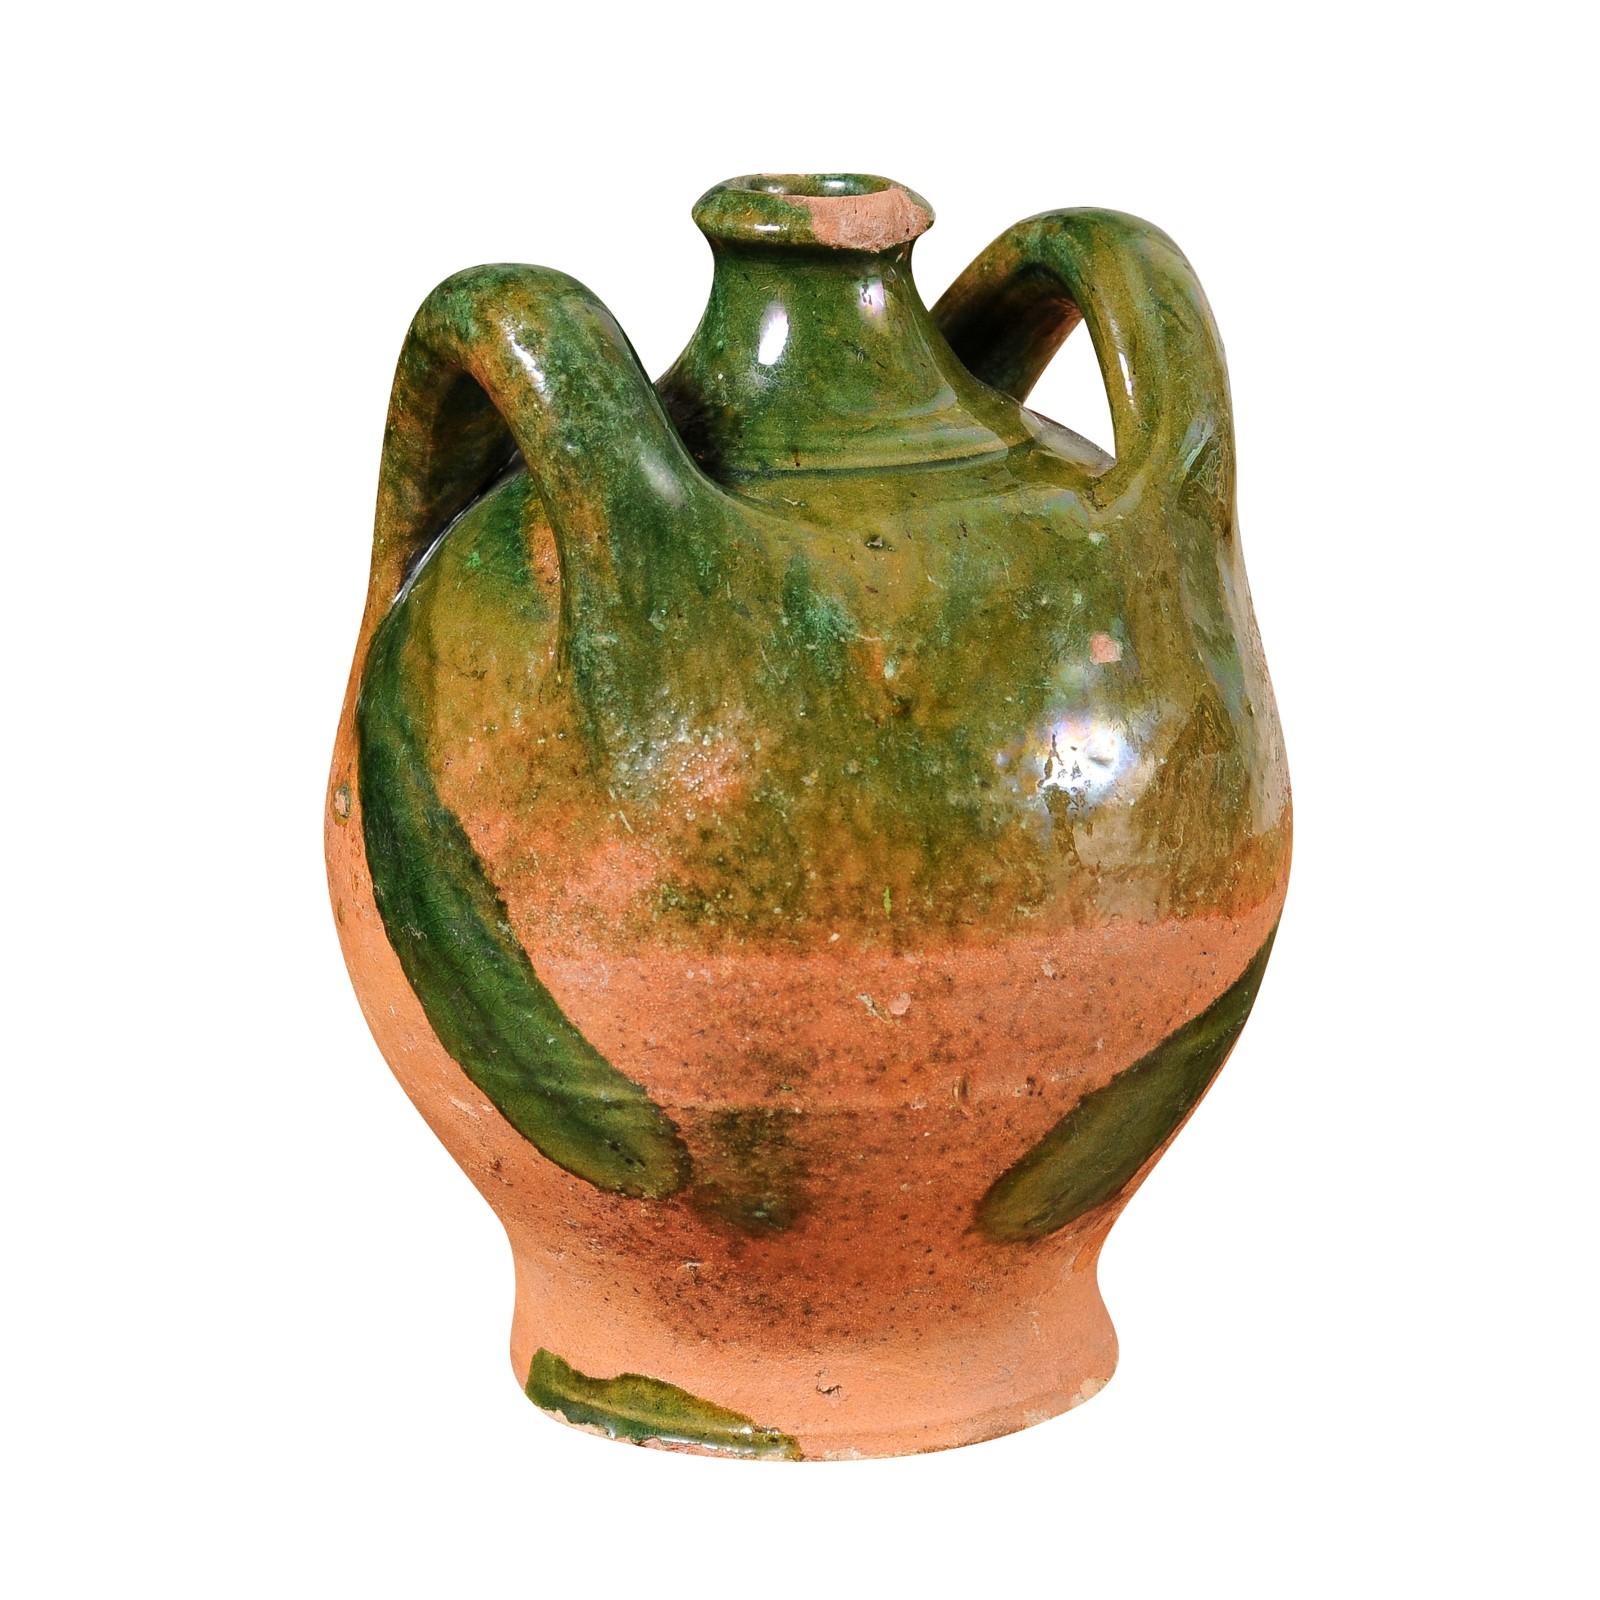 A French Provincial pottery jug from the 19th century with green glaze, dripping and lateral handles flanking the central spout. This 19th-century French Provincial pottery jug is a delightful embodiment of rustic charm and old-world craftsmanship.